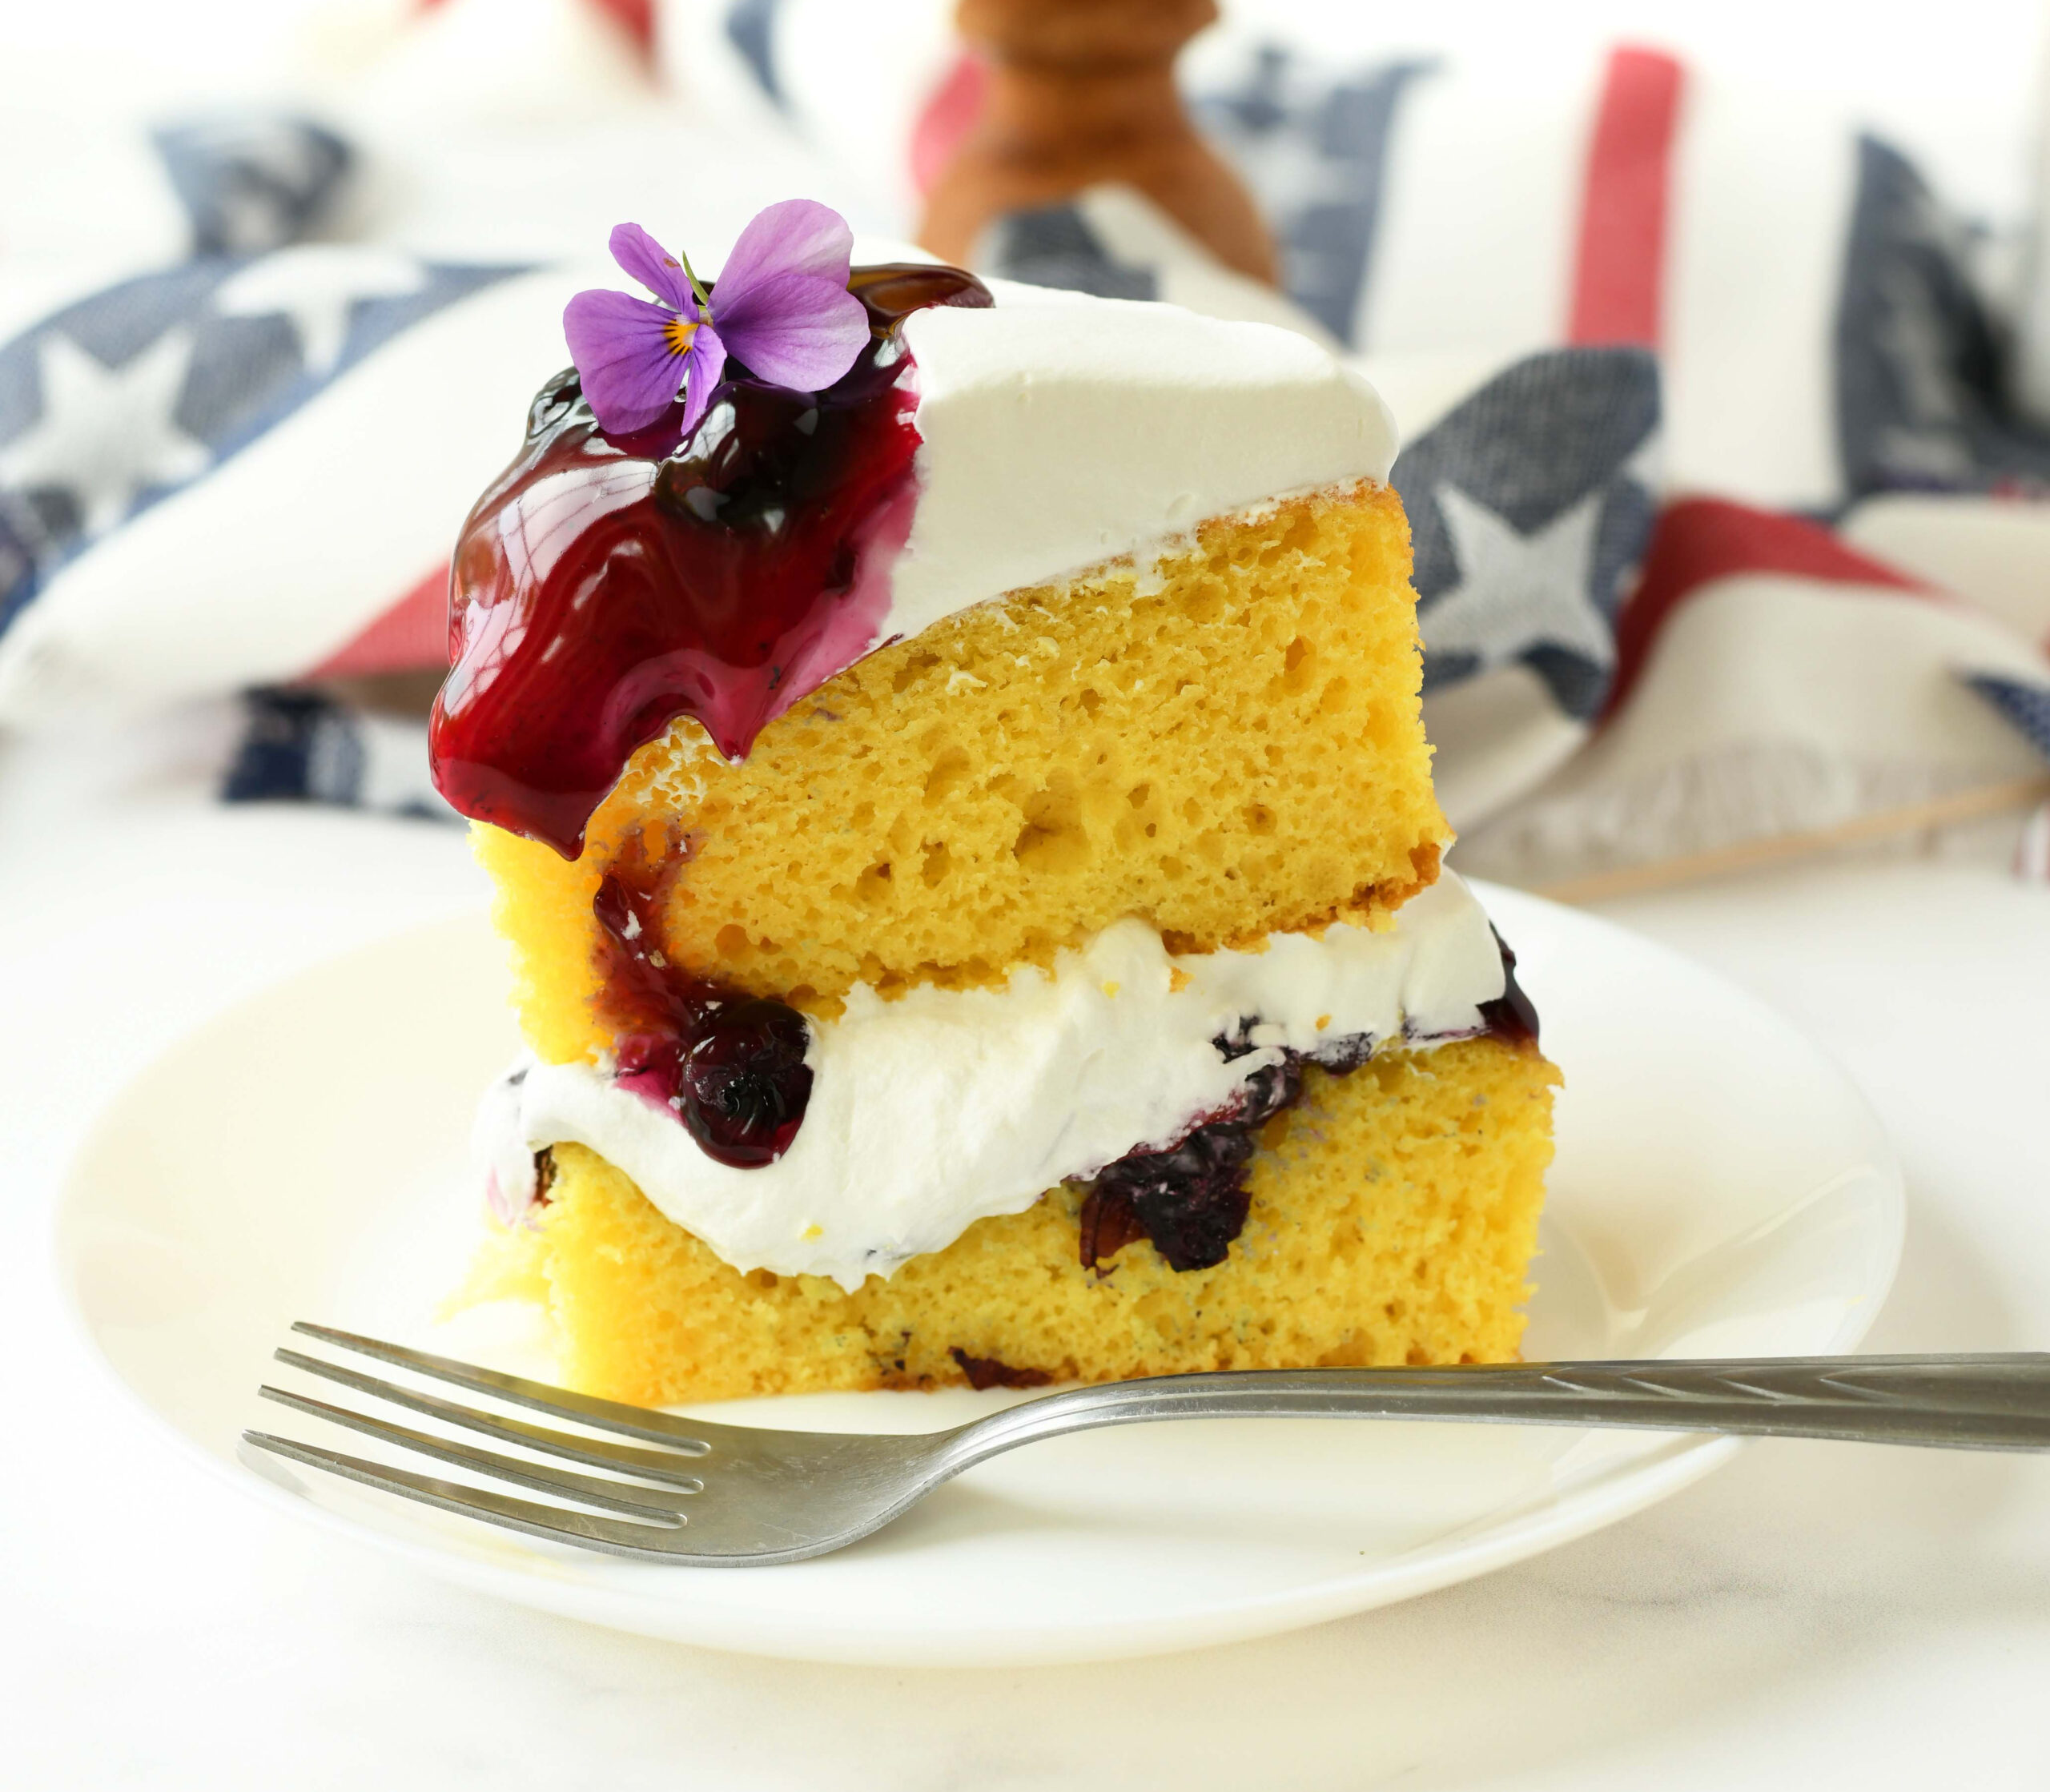 Healthy Blueberry Cake Recipe {+ Video} | The Gracious Pantry